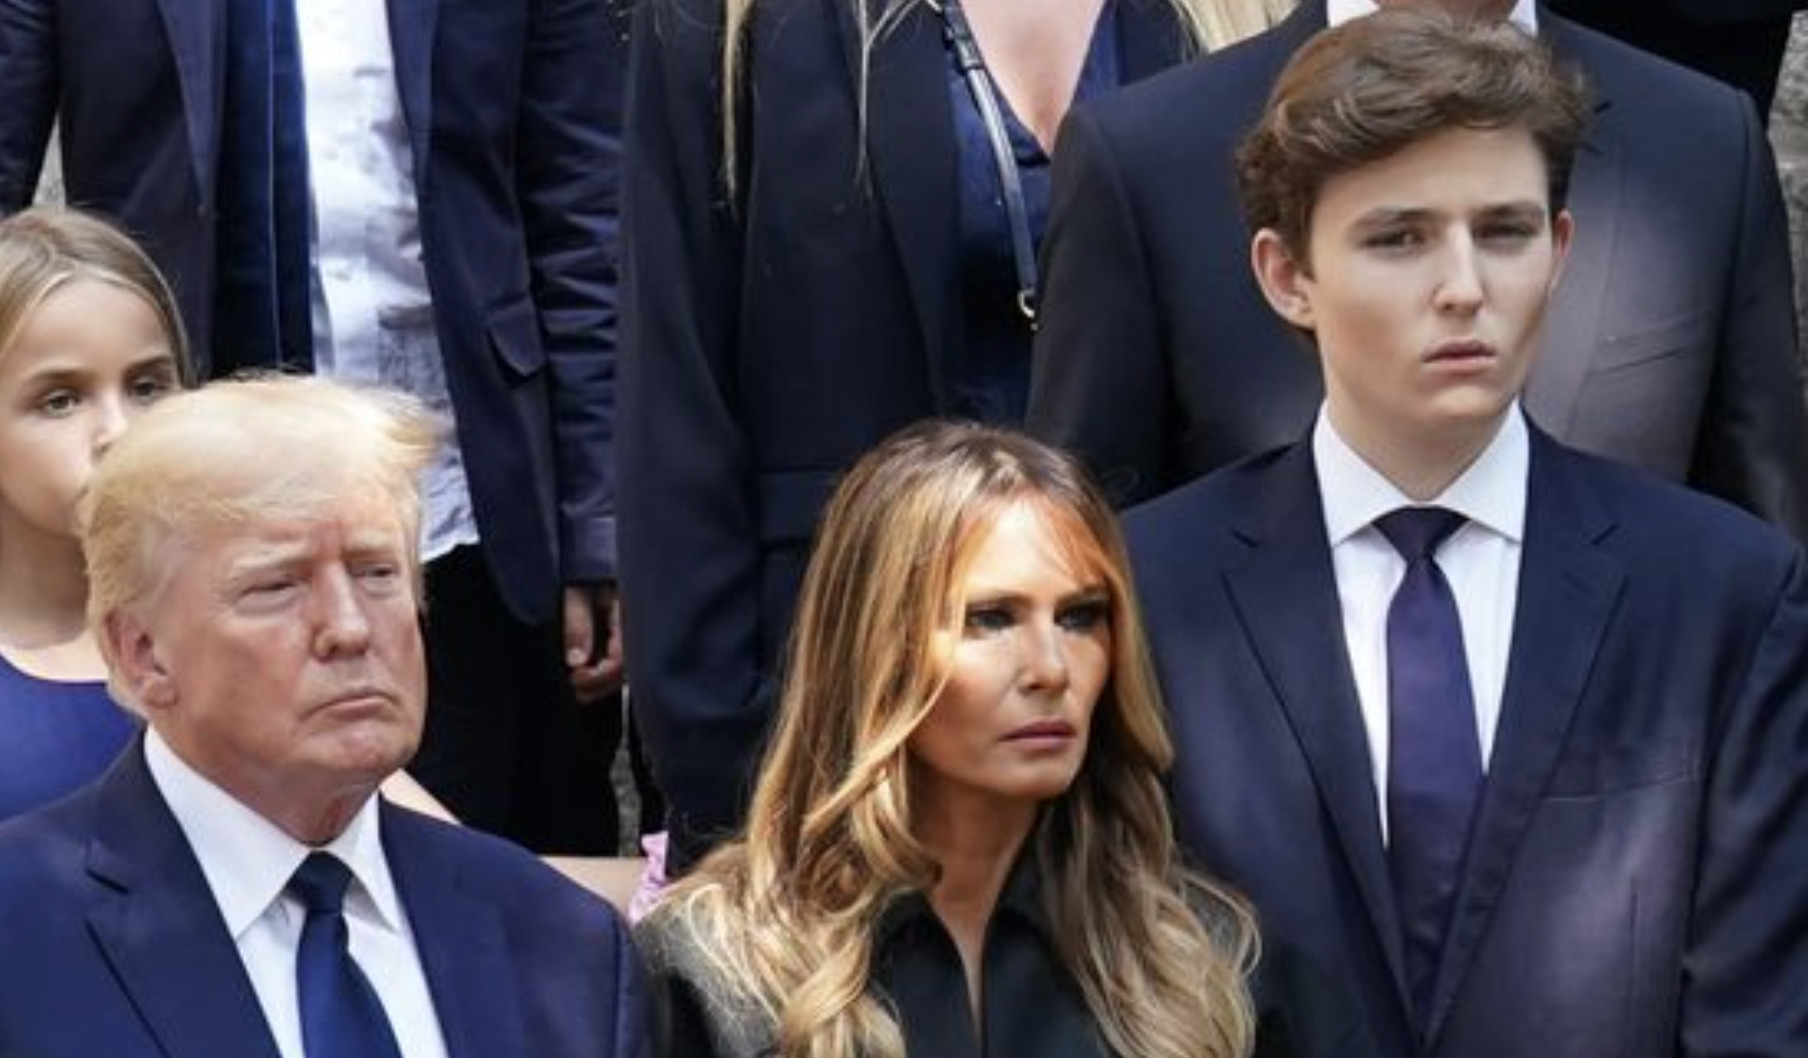 Trump Doesn't Get Along With Son Barron and Is Extremely Jealous of